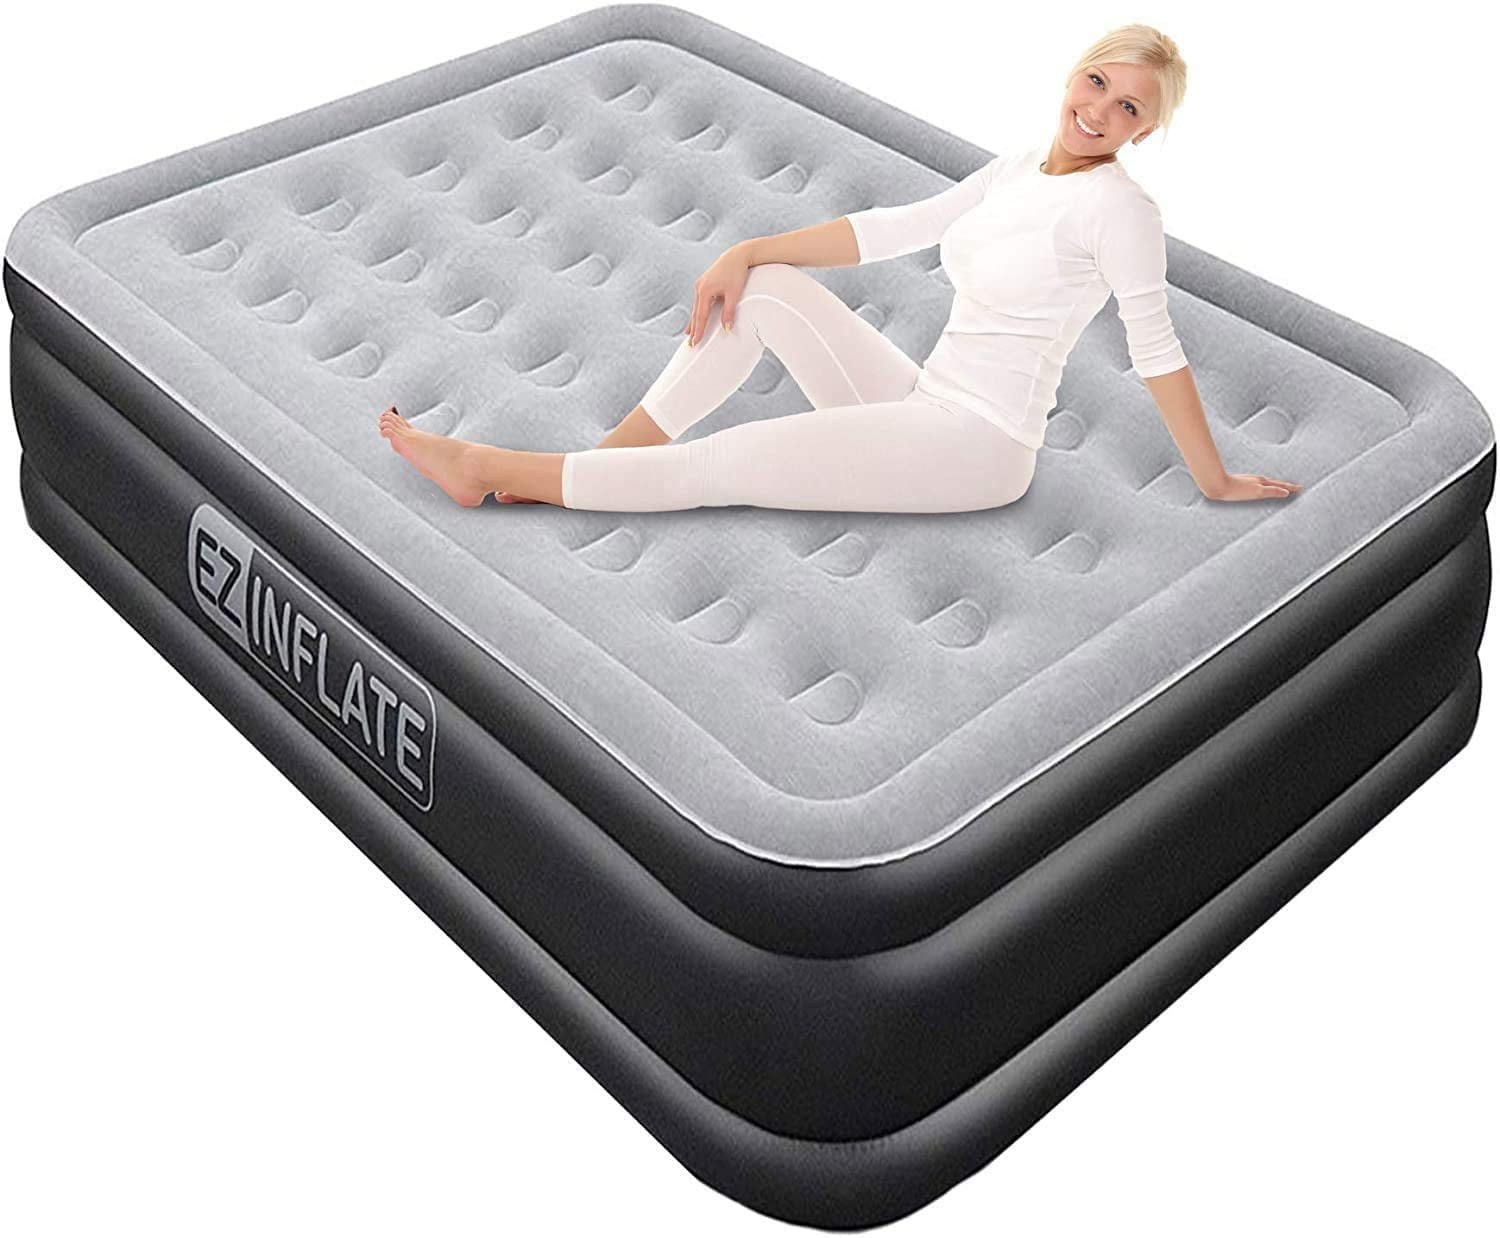 Double High Raised Inflatable Air Mattress Bed Built In Electric Pump Single 